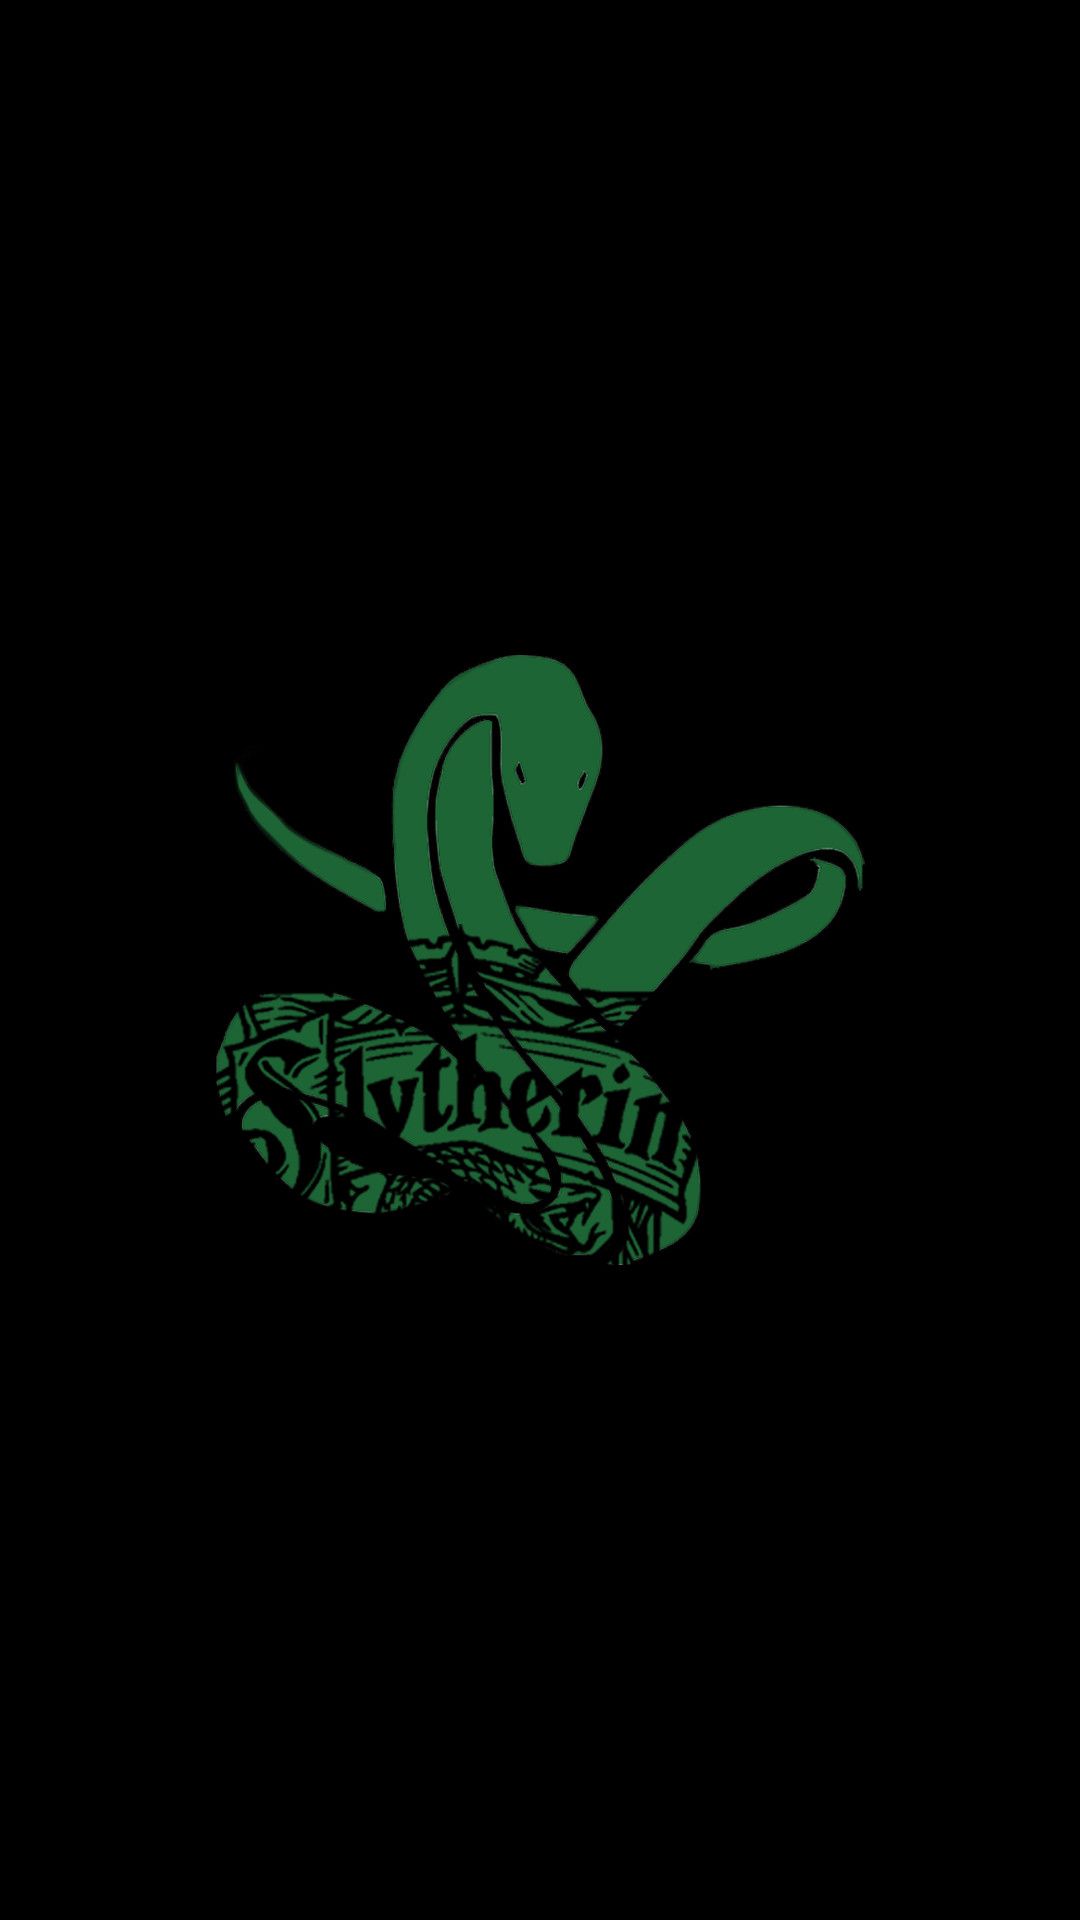 1080x1920 Slytherin Iphone Wallpaper